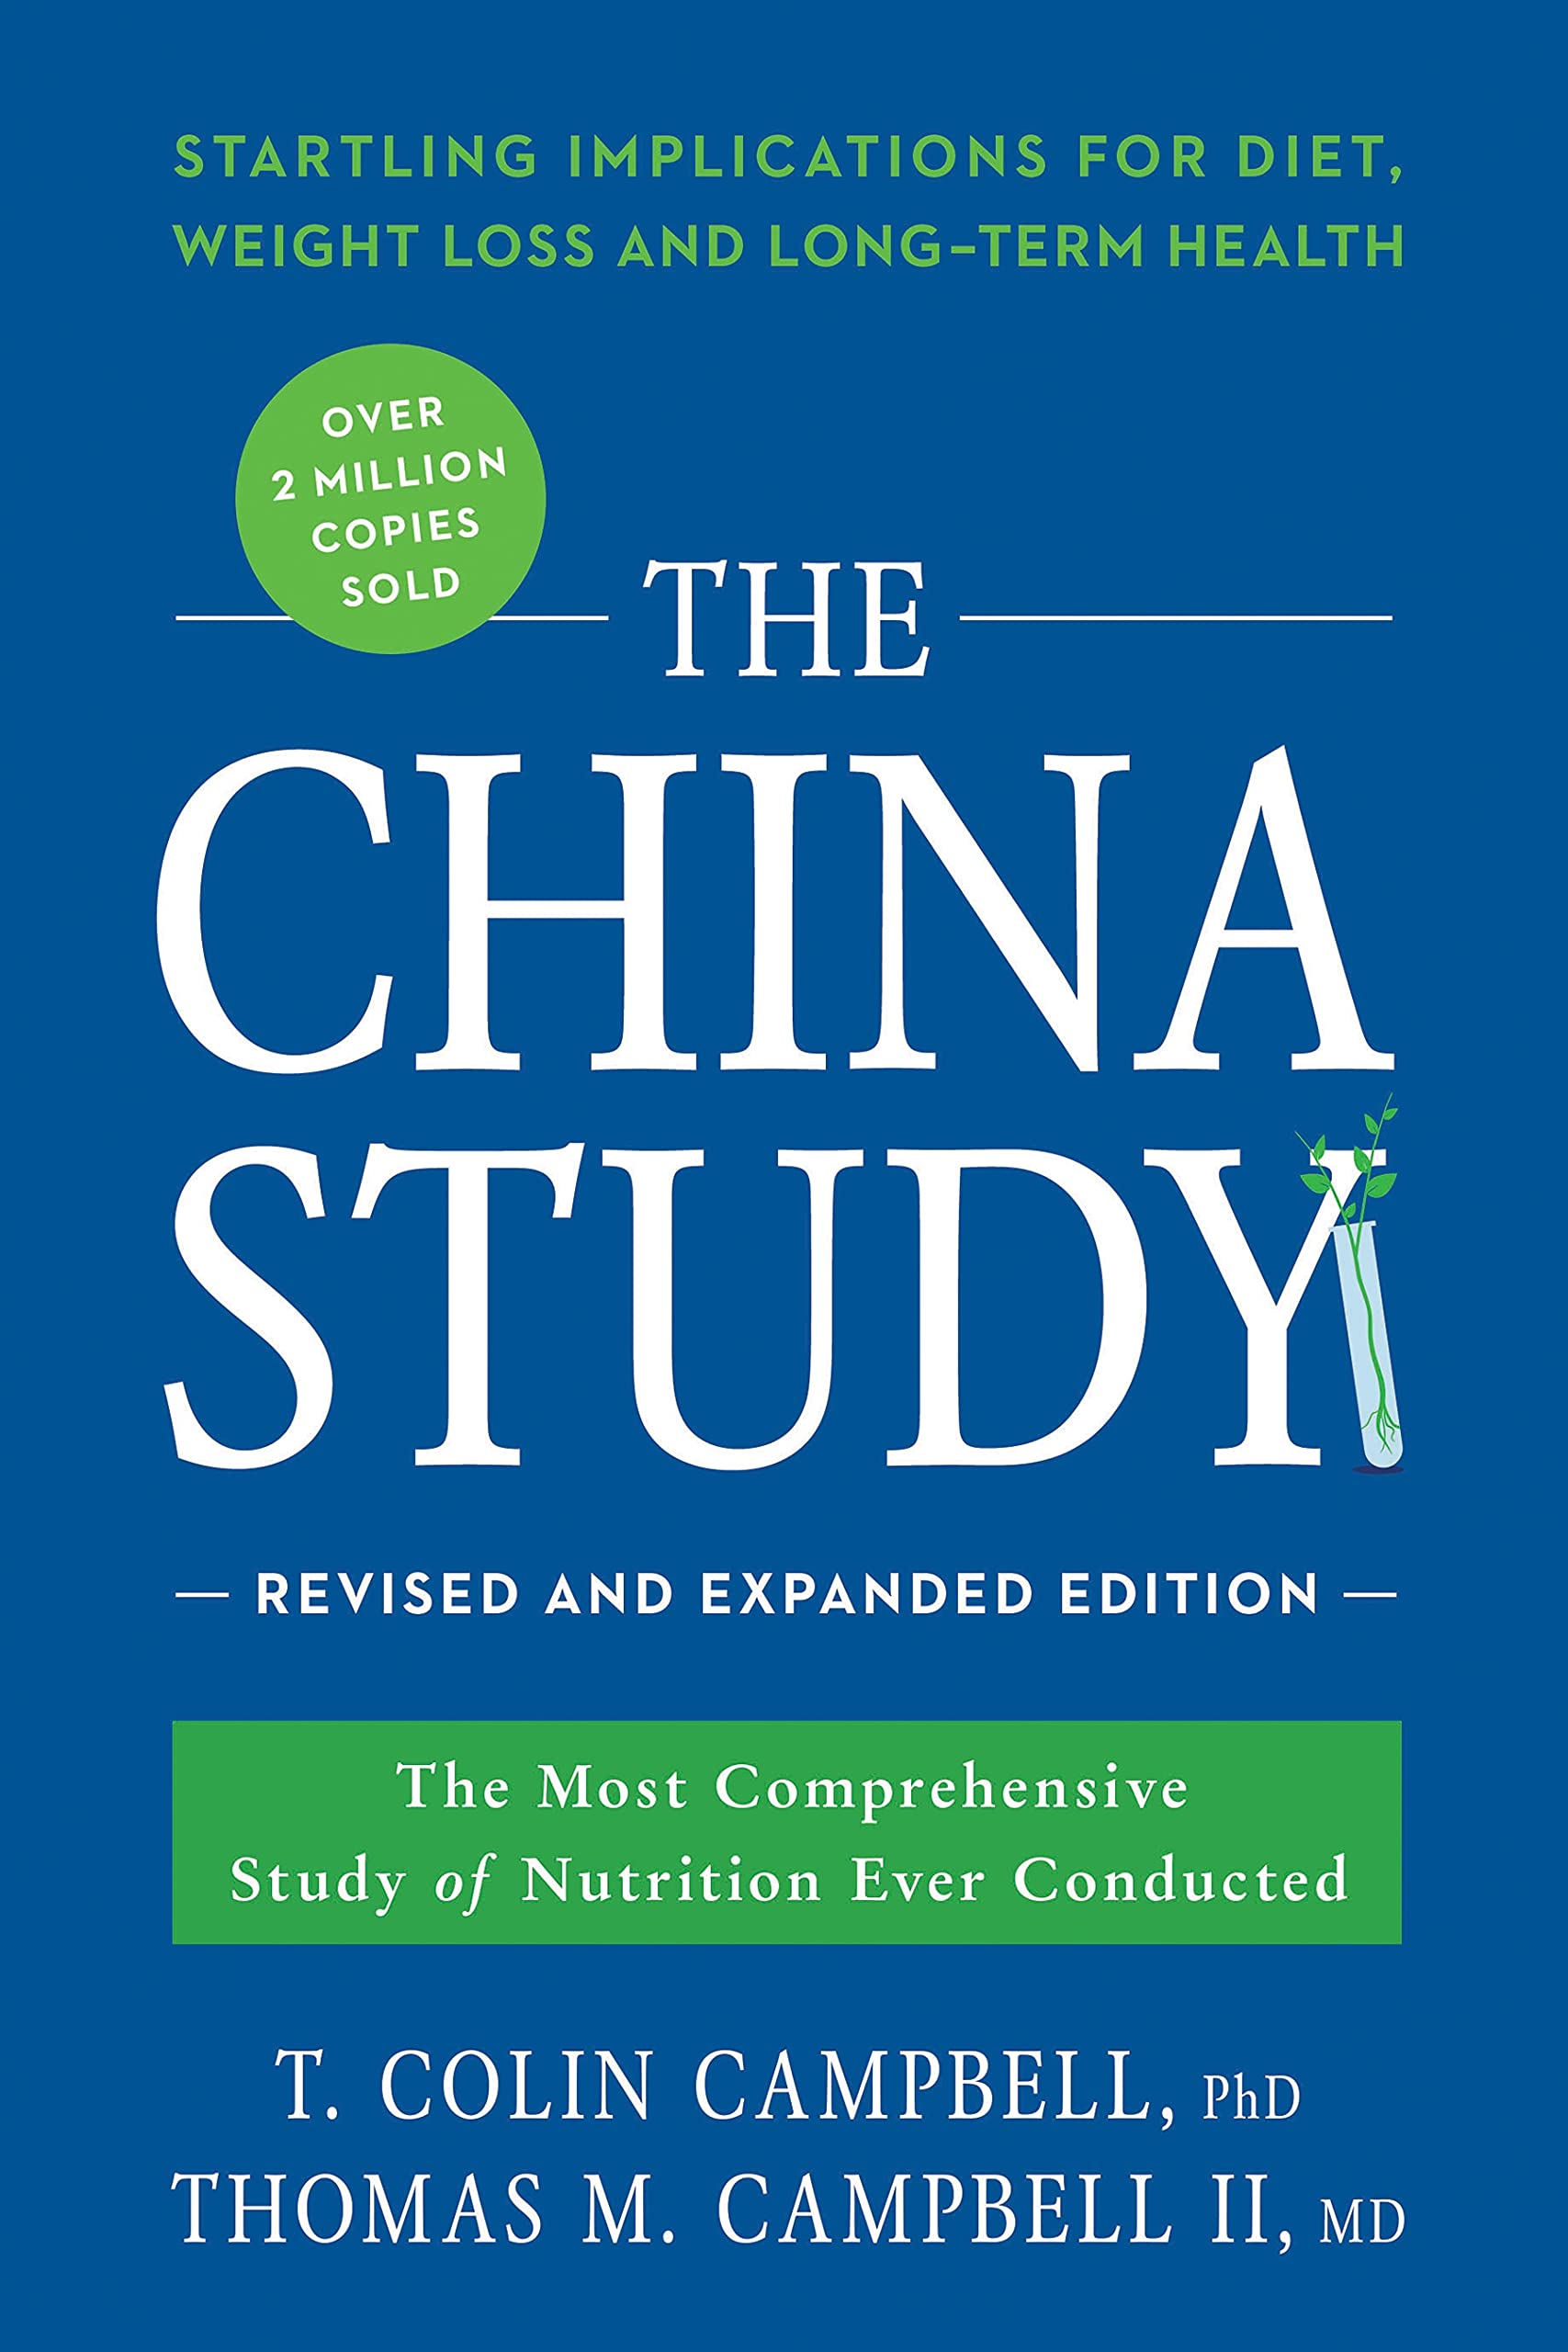 Cover of the book "The China Study"